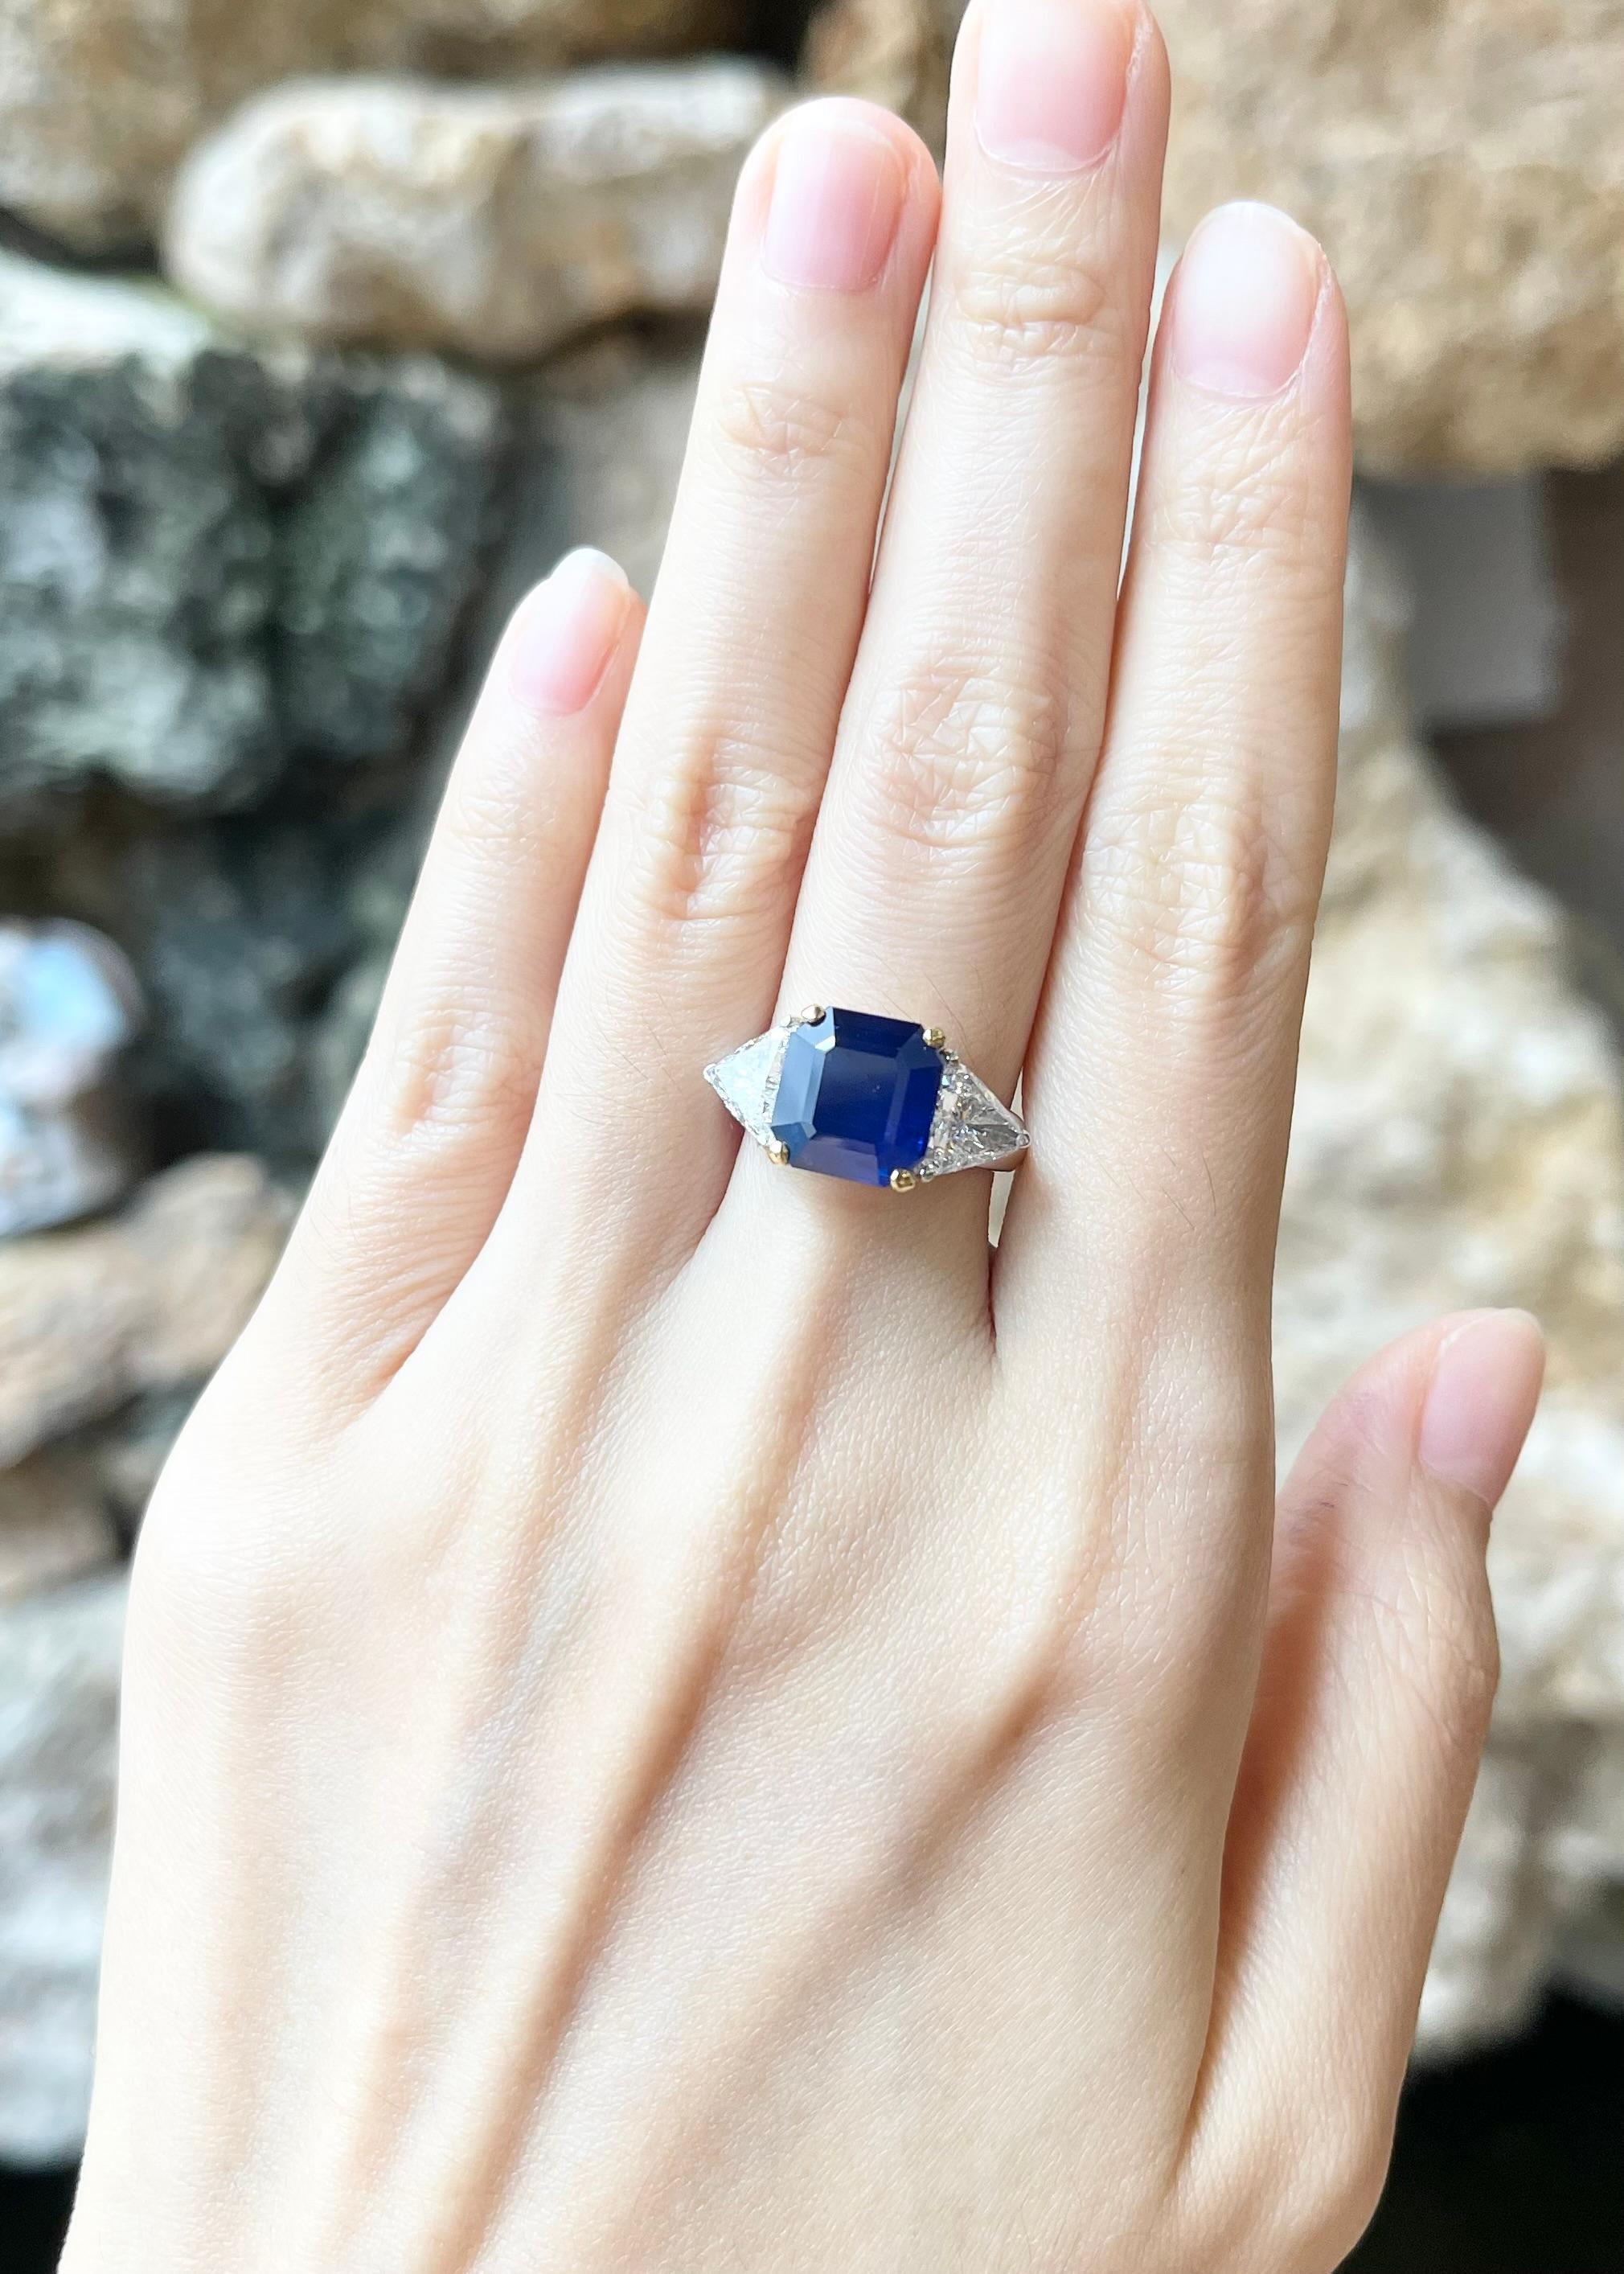 Blue Sapphire 5.20 carats with Diamond (F color) 1.80 carats Ring set in 18K White Gold Settings

Width:  2.1 cm 
Length: 1.0 cm
Ring Size: 51
Total Weight: 7.53 grams

Blue sapphire 
Width:  1.0 cm 
Length: 1.0 cm
